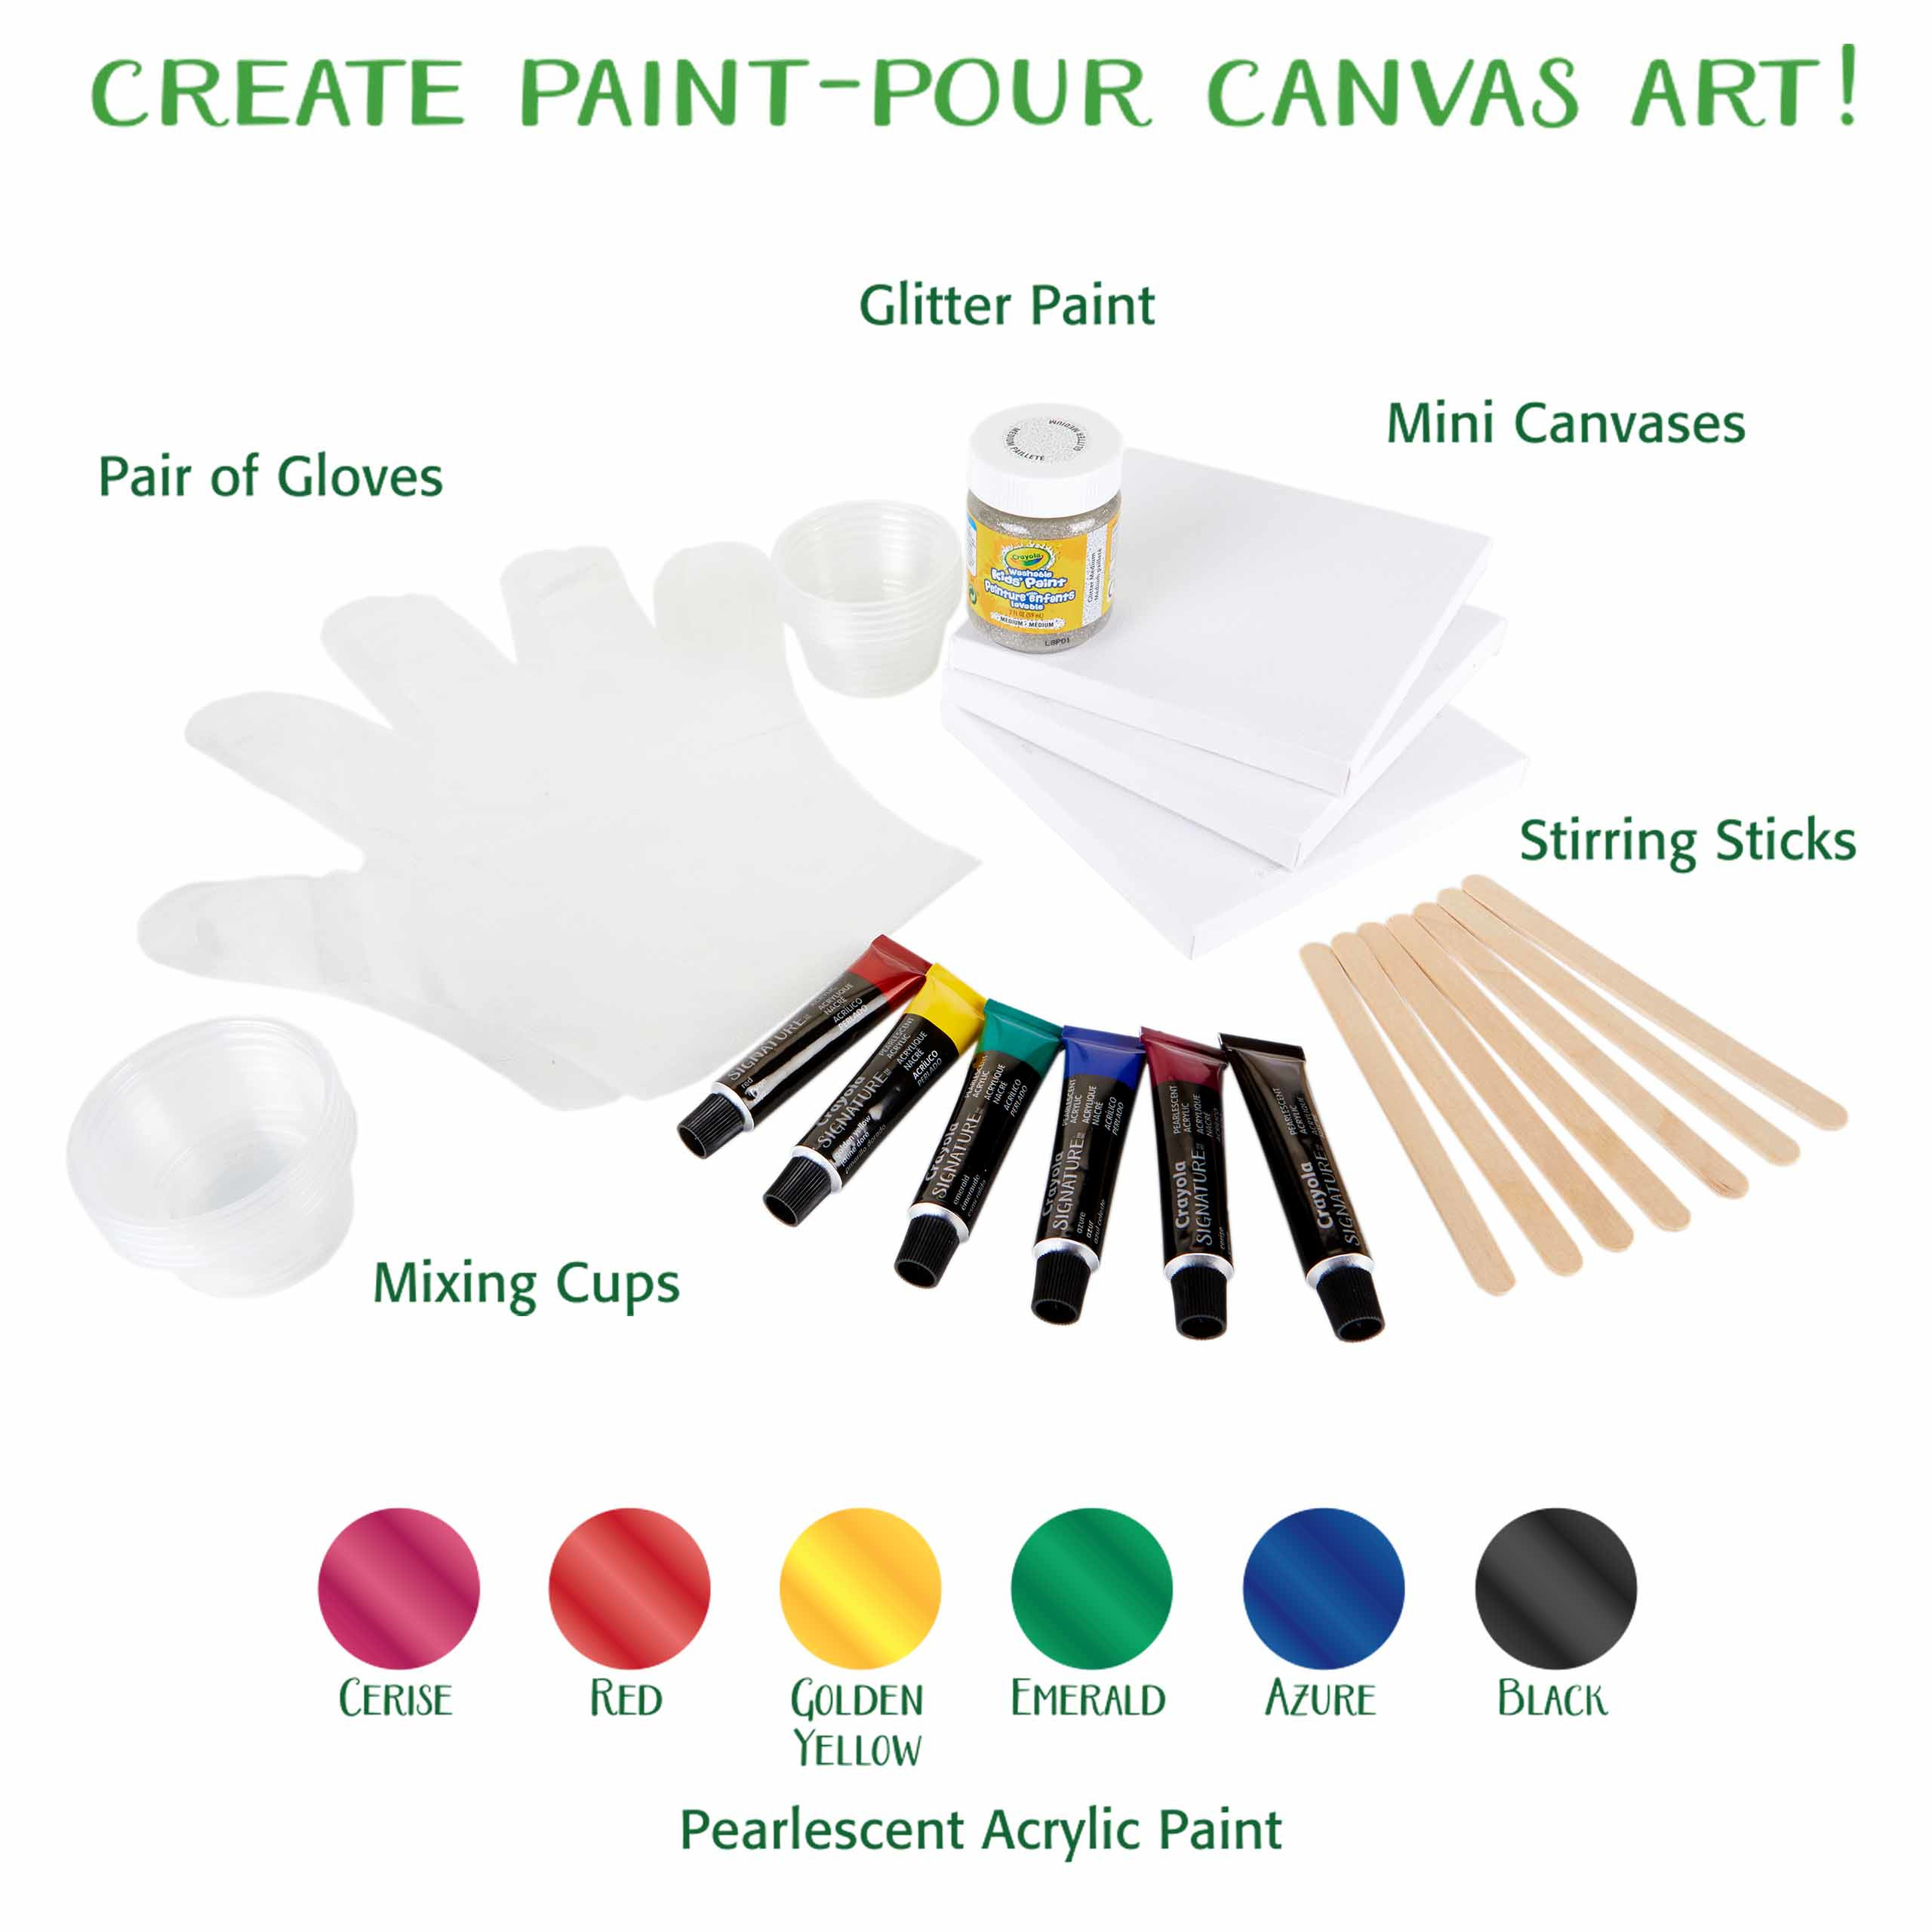 Crayola Mini Canvas Painting Kit, DIY Gifts for Crafters, Arts & Crafts for Teens, 14pcs, Adult - image 3 of 13